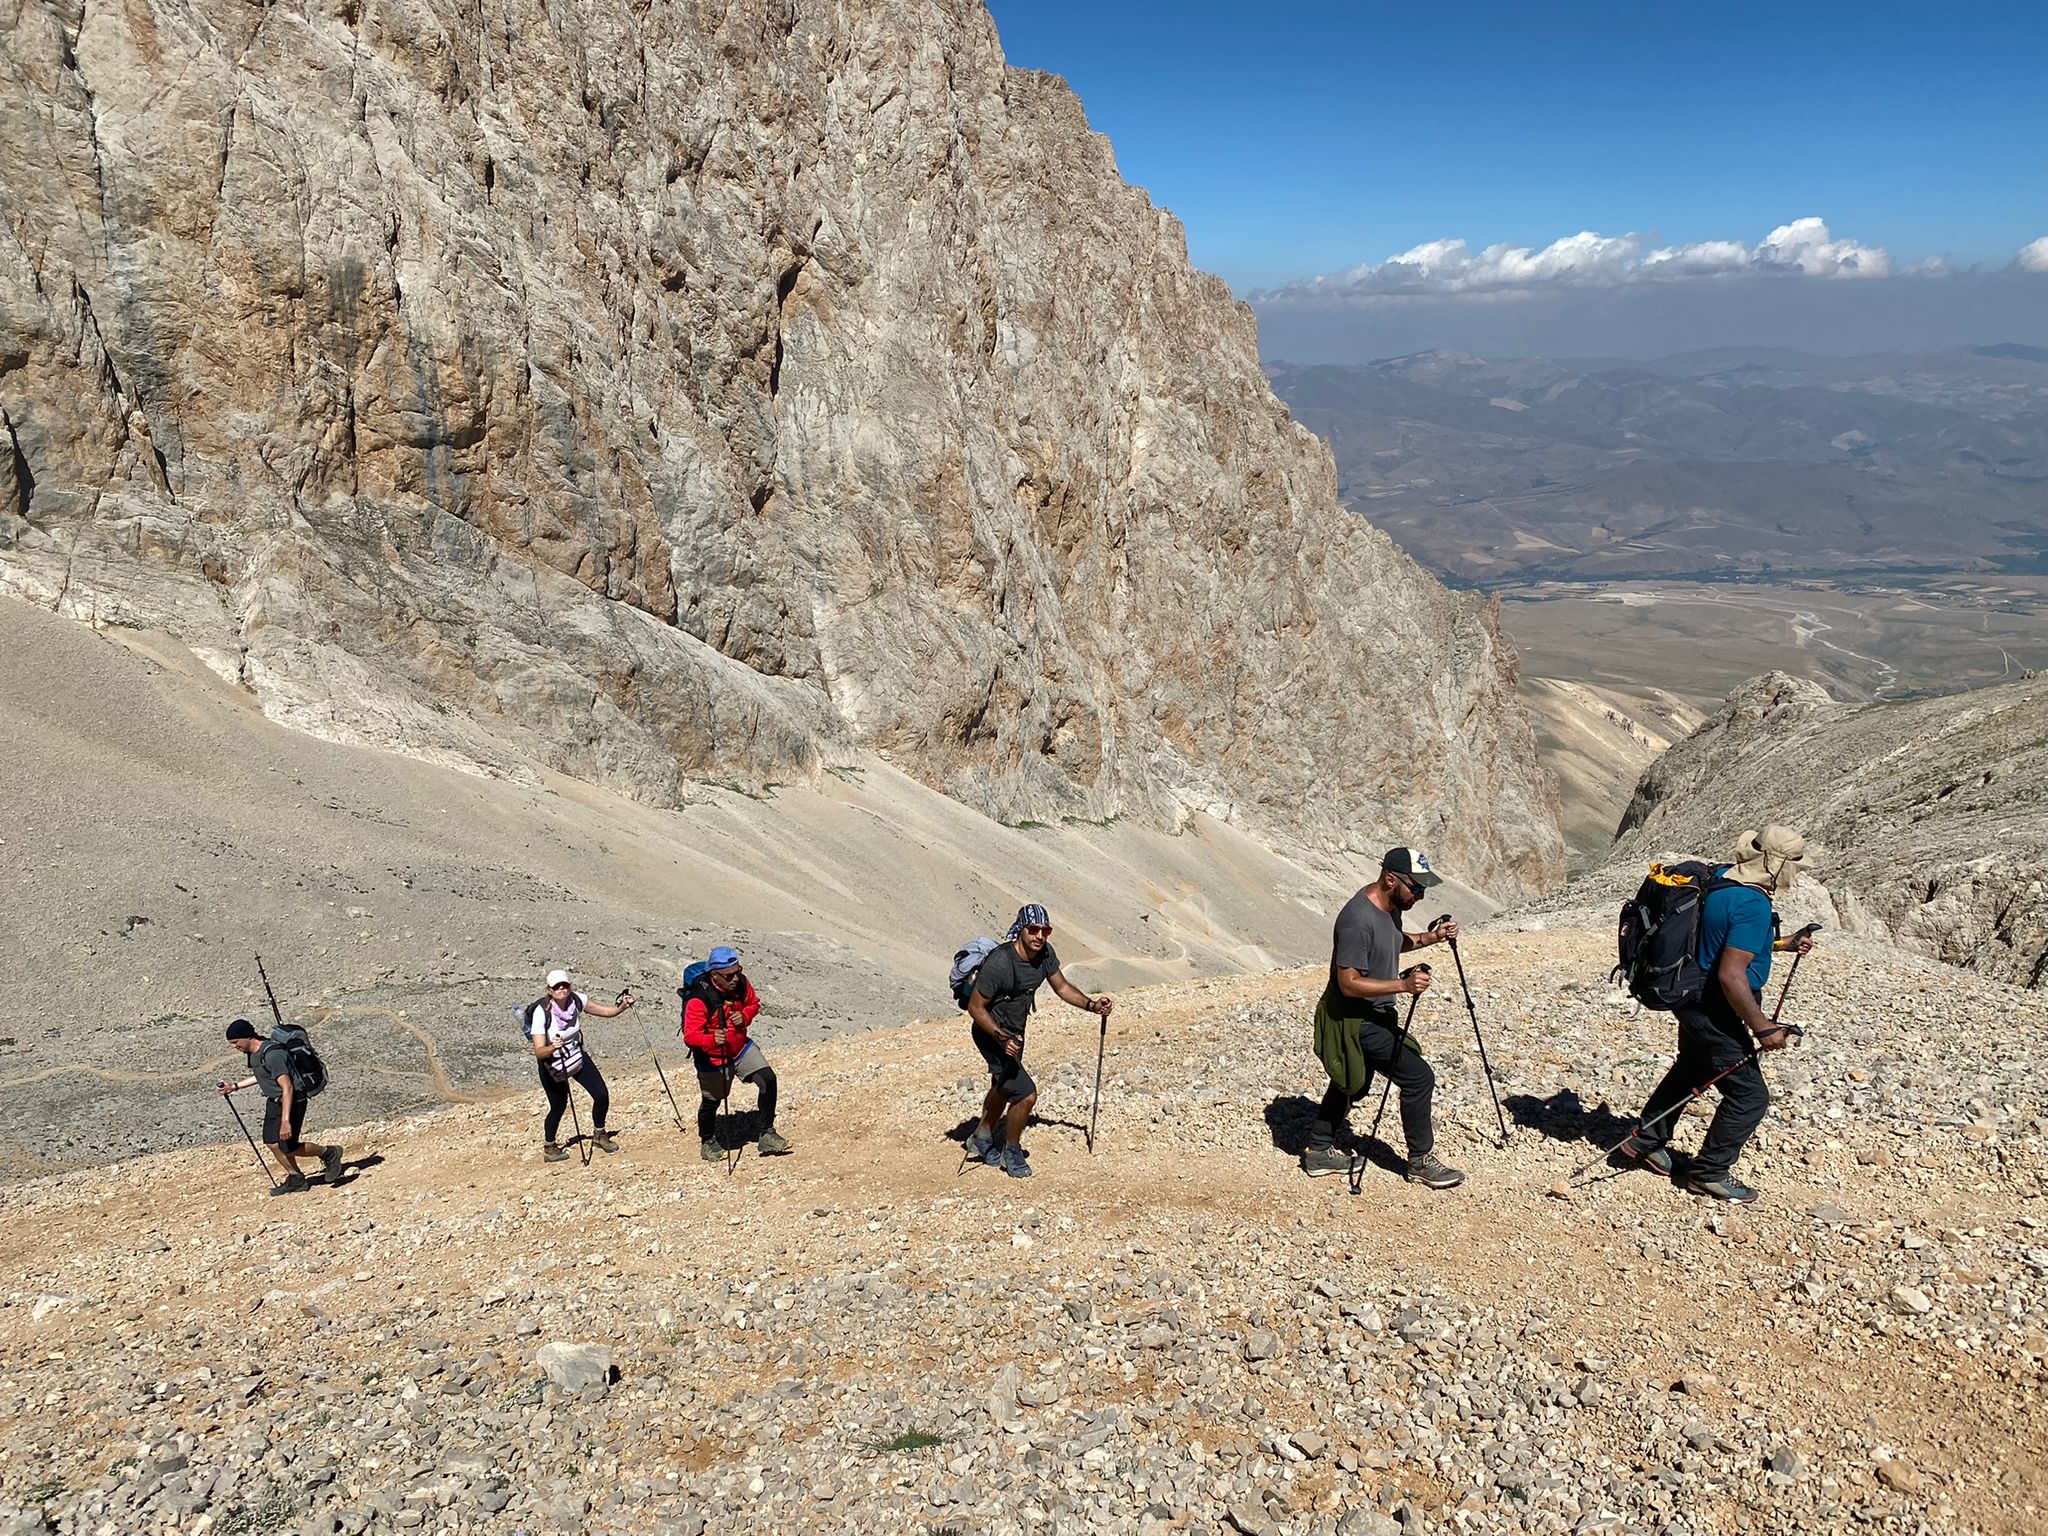 A group of hikers scale a mountain in Turkey's Aladaglar Range.